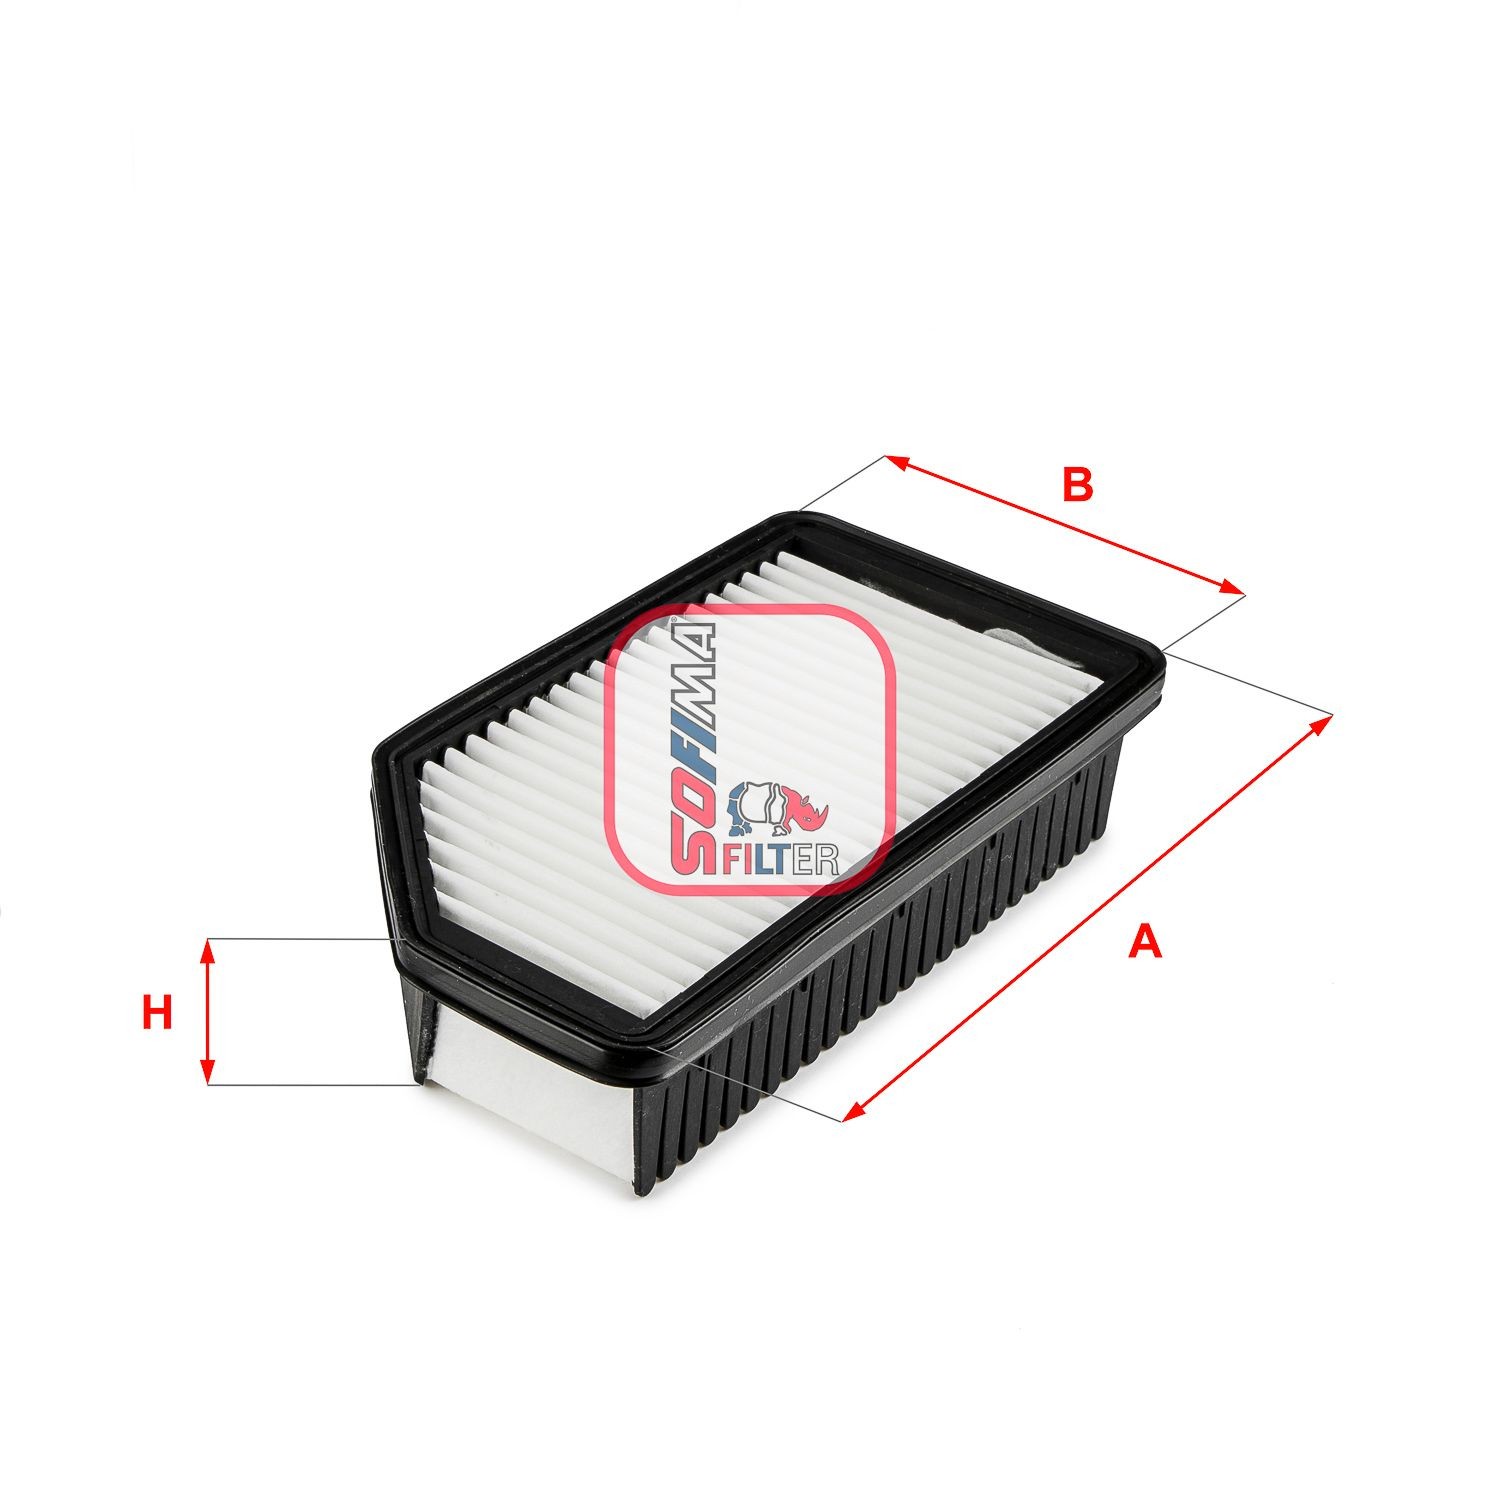 SOFIMA 55mm, 132mm, 248mm, Filter Insert Length: 248mm, Width: 132mm, Height: 55mm Engine air filter S 3627 A buy